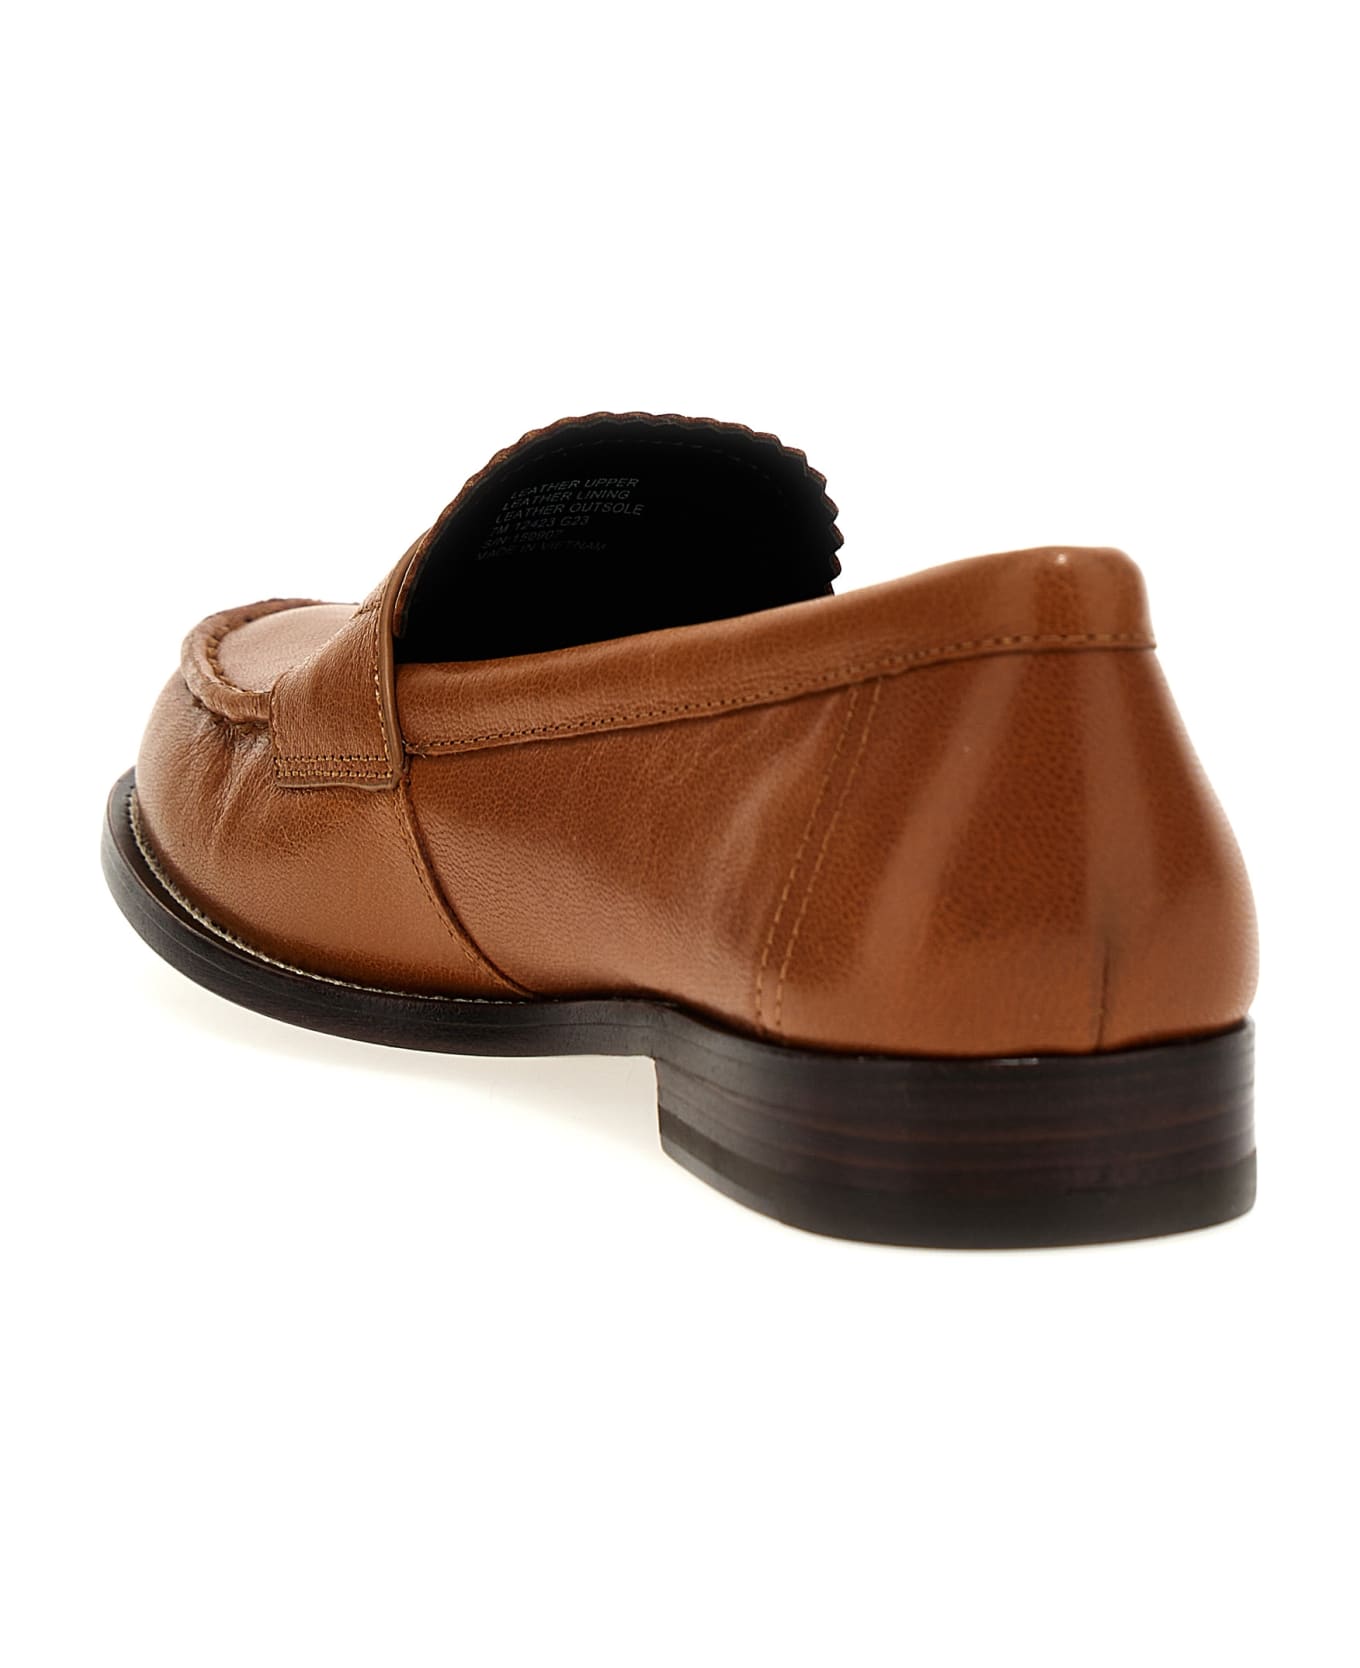 Tory Burch Camel Leather Loafers - Brown